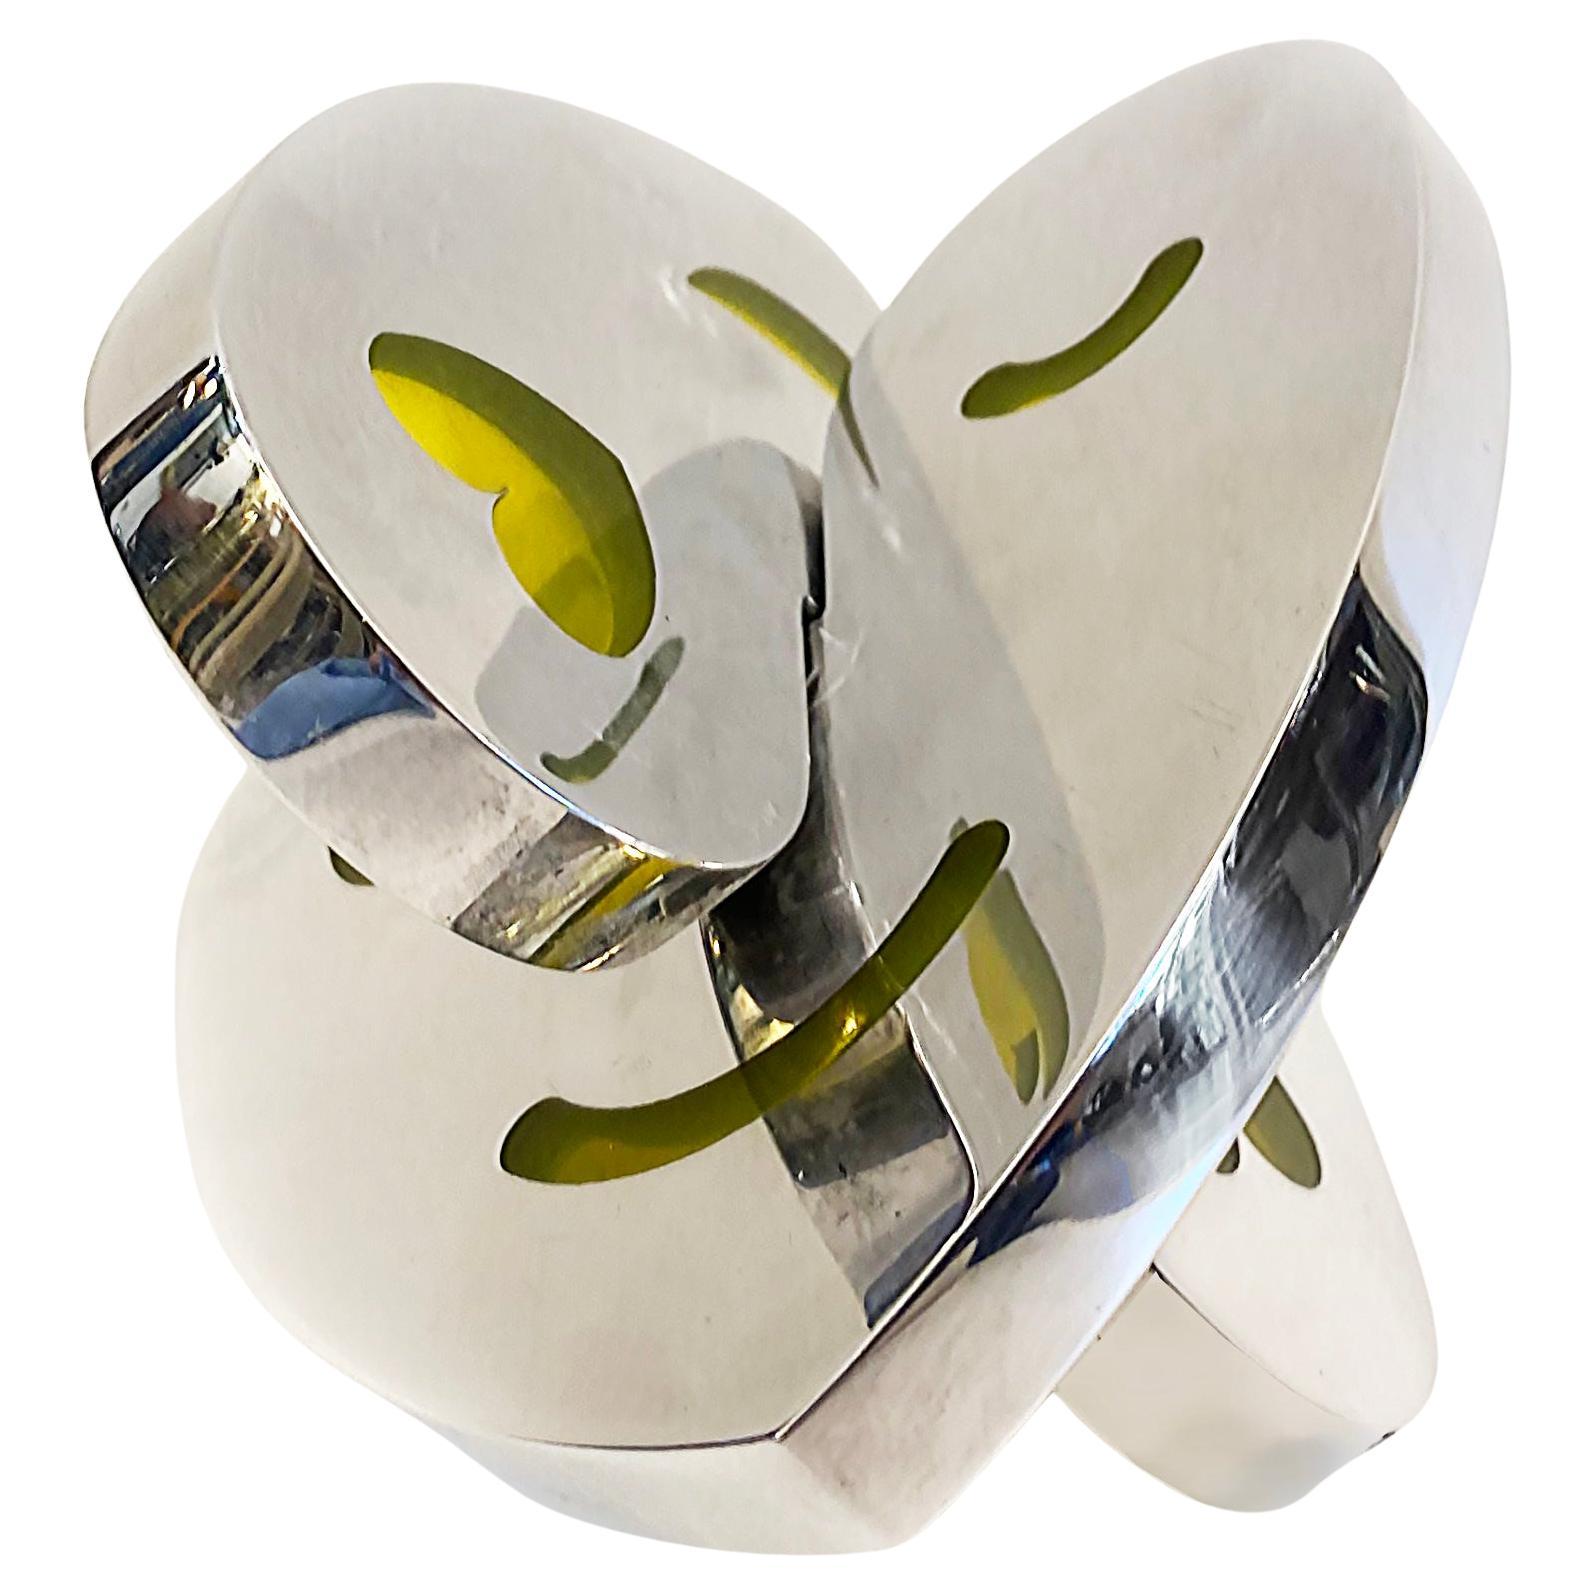 Polished Aluminum, Resin Interlocking Hearts Sculpture by Michael Gitter For Sale